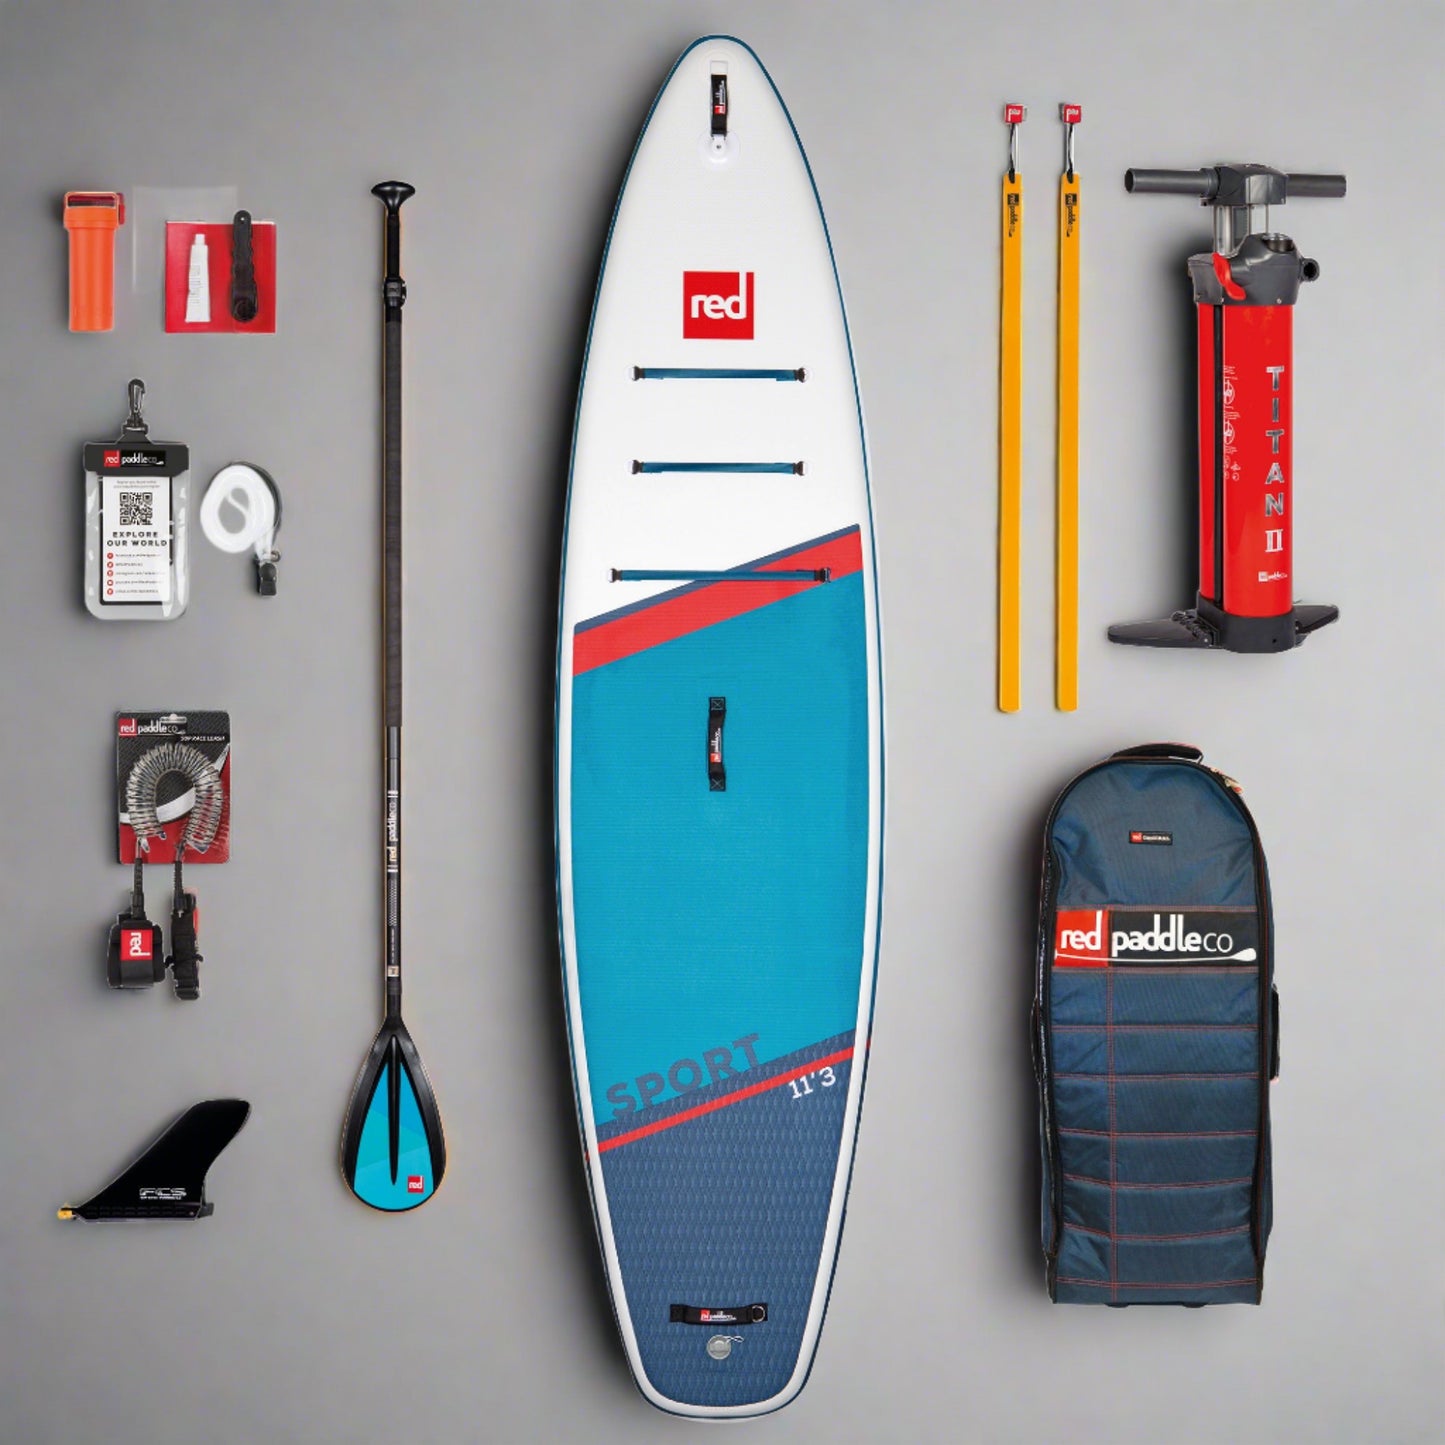 Copenhagen Surf Shop 2021 Red Paddle Co 11'3" SPORT TOURING MSL Oppustelig Stand Up Paddle SUP iSUP Board , Taske, Titan 2 Pumpe, Carbon 50 Nylon Paddle & Leash